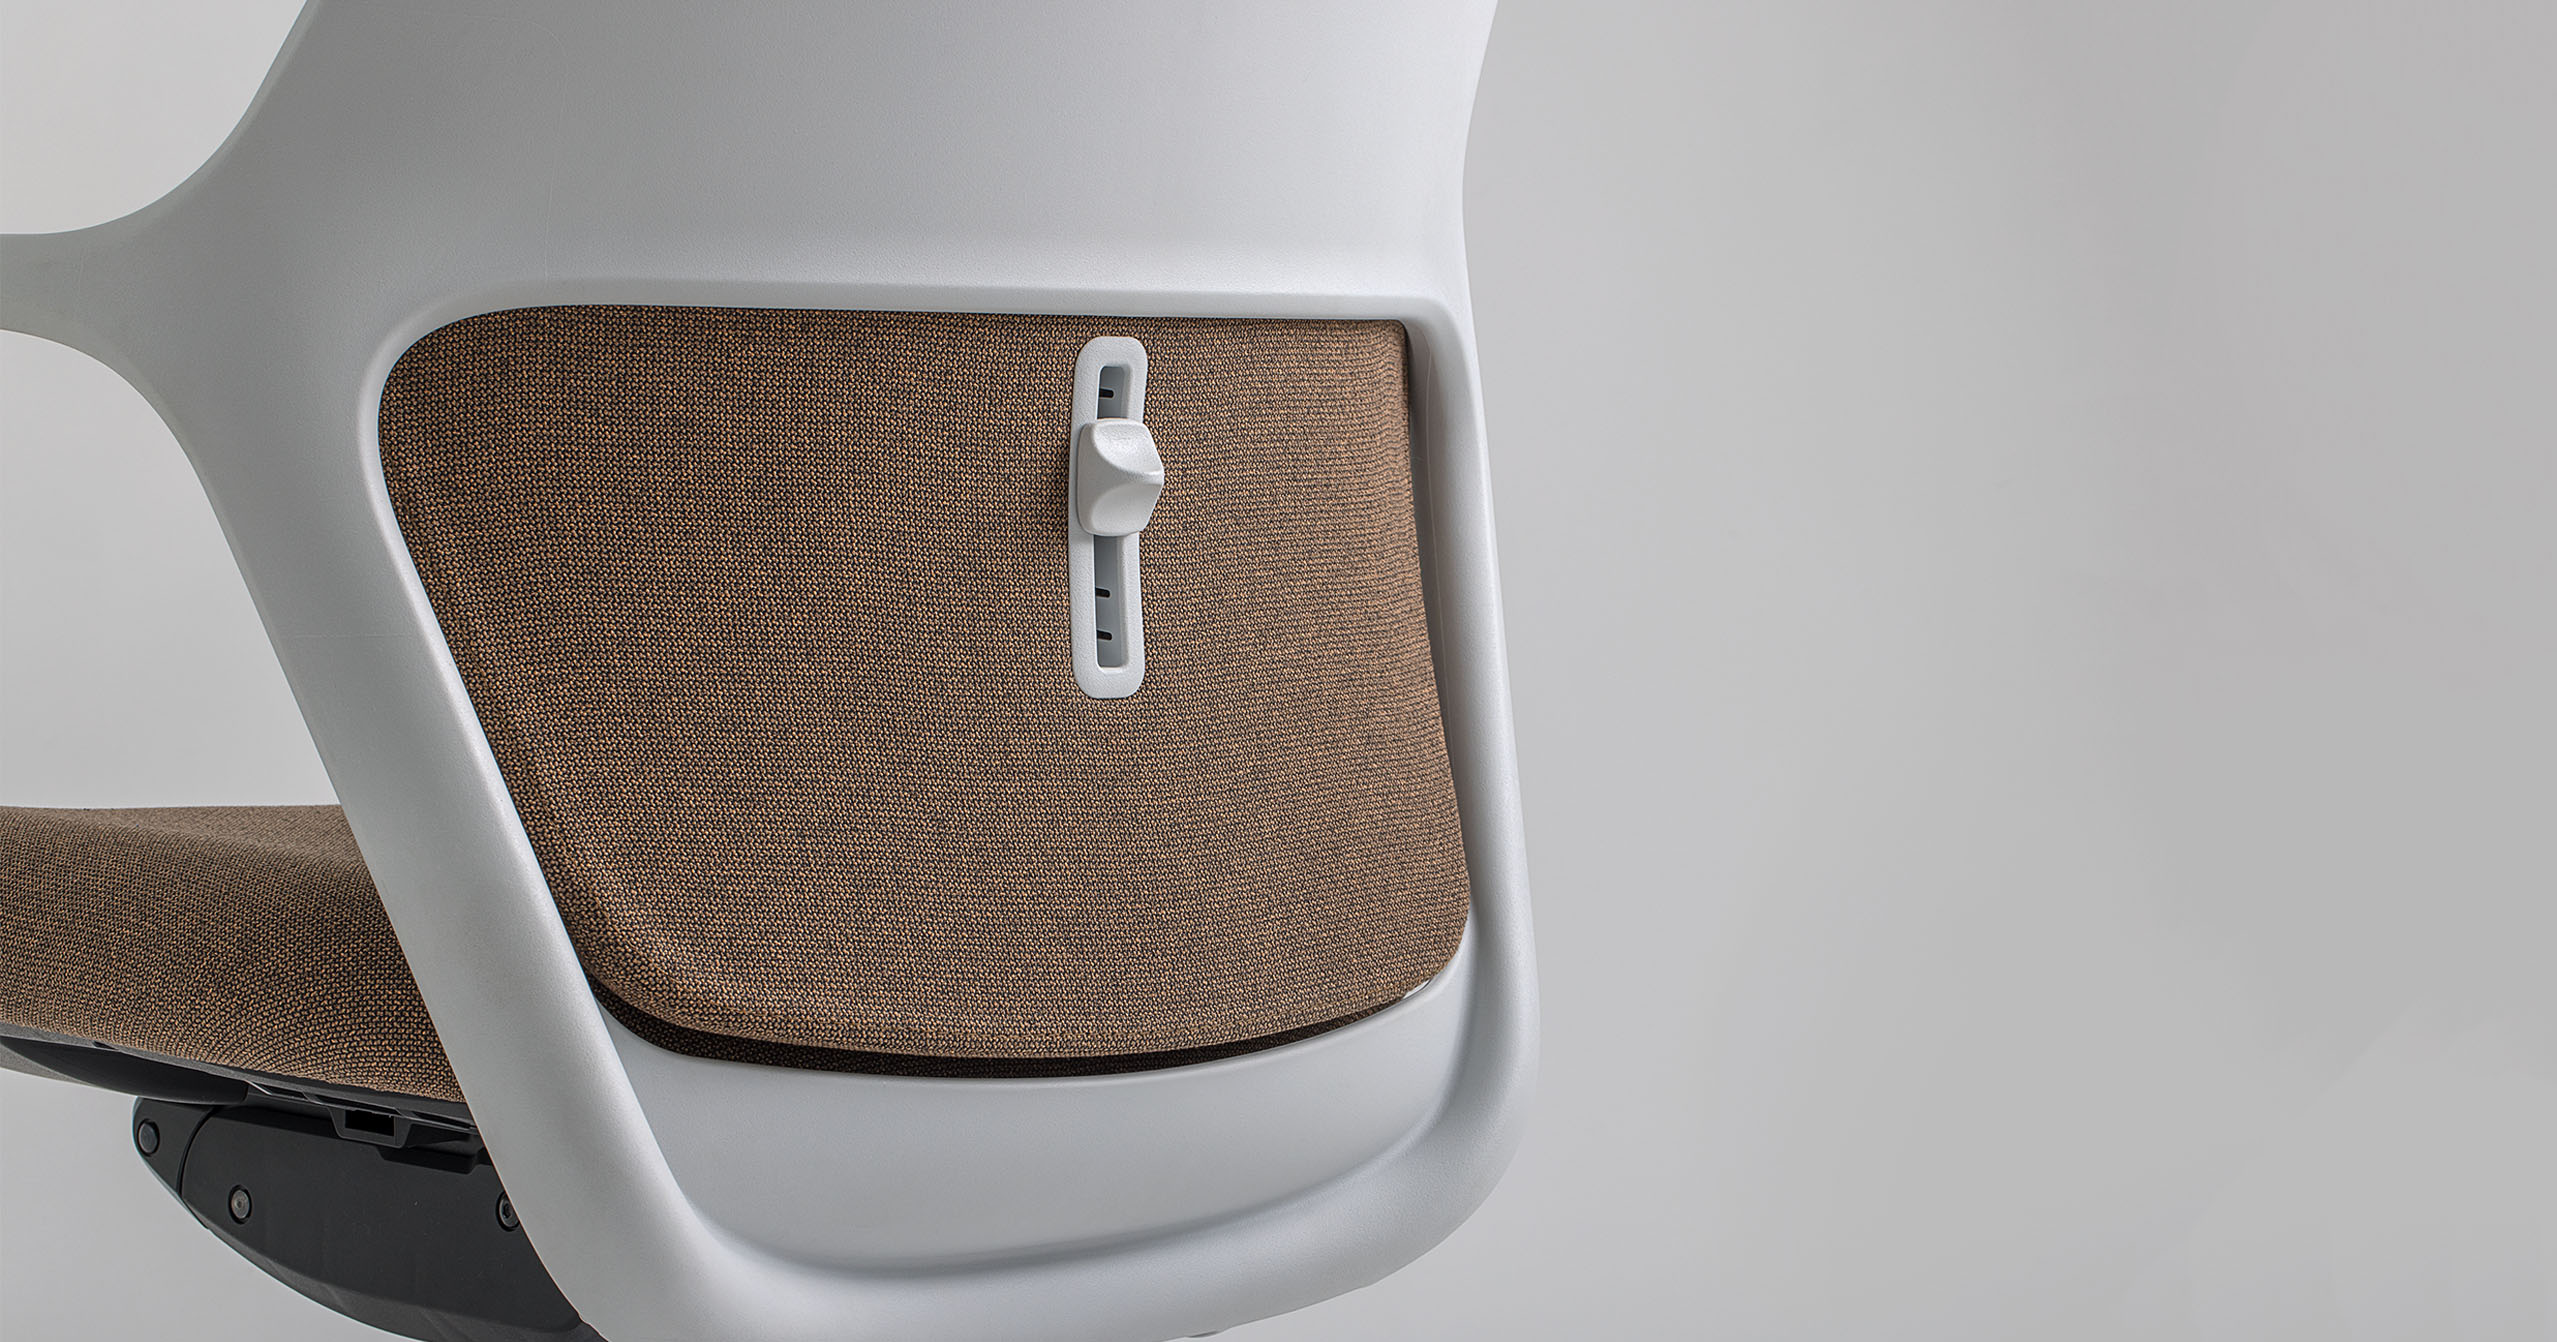 Close-up of the backrest adjustment knob on the OFY chair designed by Alegre Design for Narbutas. The chair features a brown fabric finish and ergonomic design, including adjustable lumbar support for enhanced comfort in modern office environments.